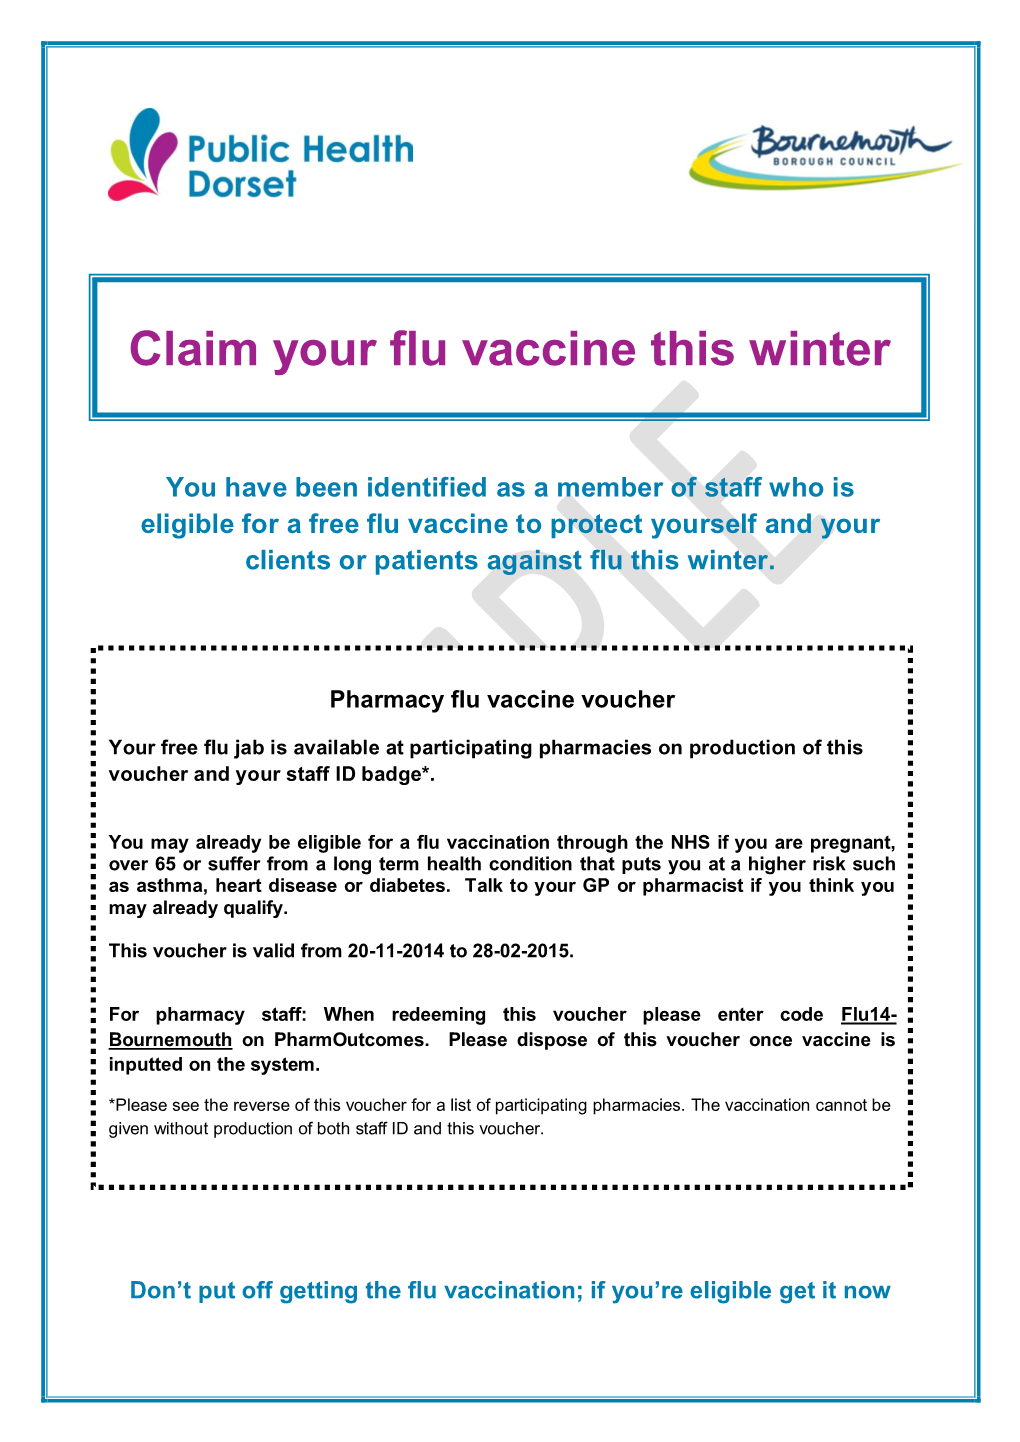 We're Offering All Social Care Professionals in Dorset a Flu Vaccination